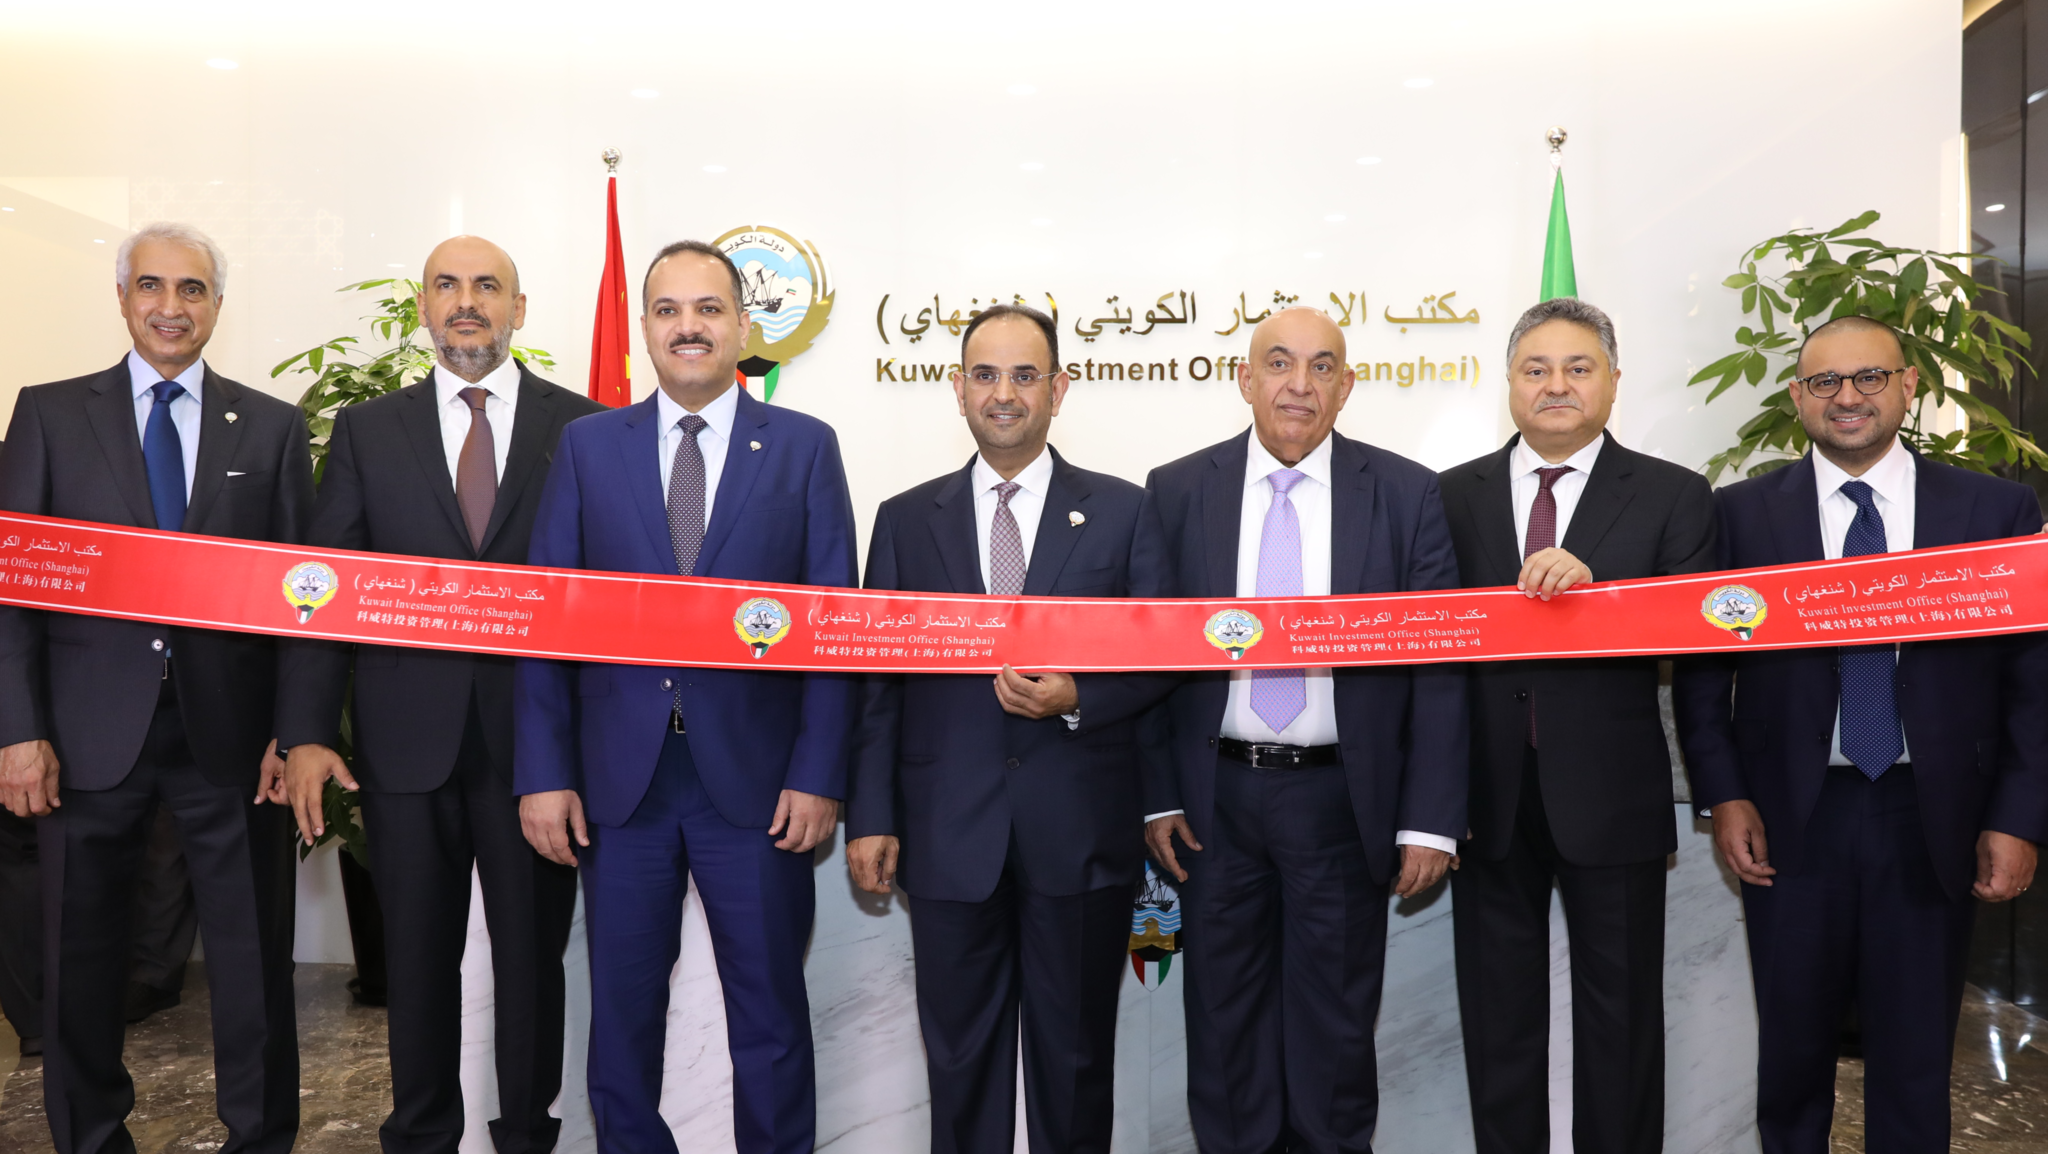 Kuwait's Minister of Finance and Chairman of the Board of Directors of Kuwait Investment Authority (KIA) Dr. Nayef Al-Hajraf inaugurates  KIA's office in Shanghai, China